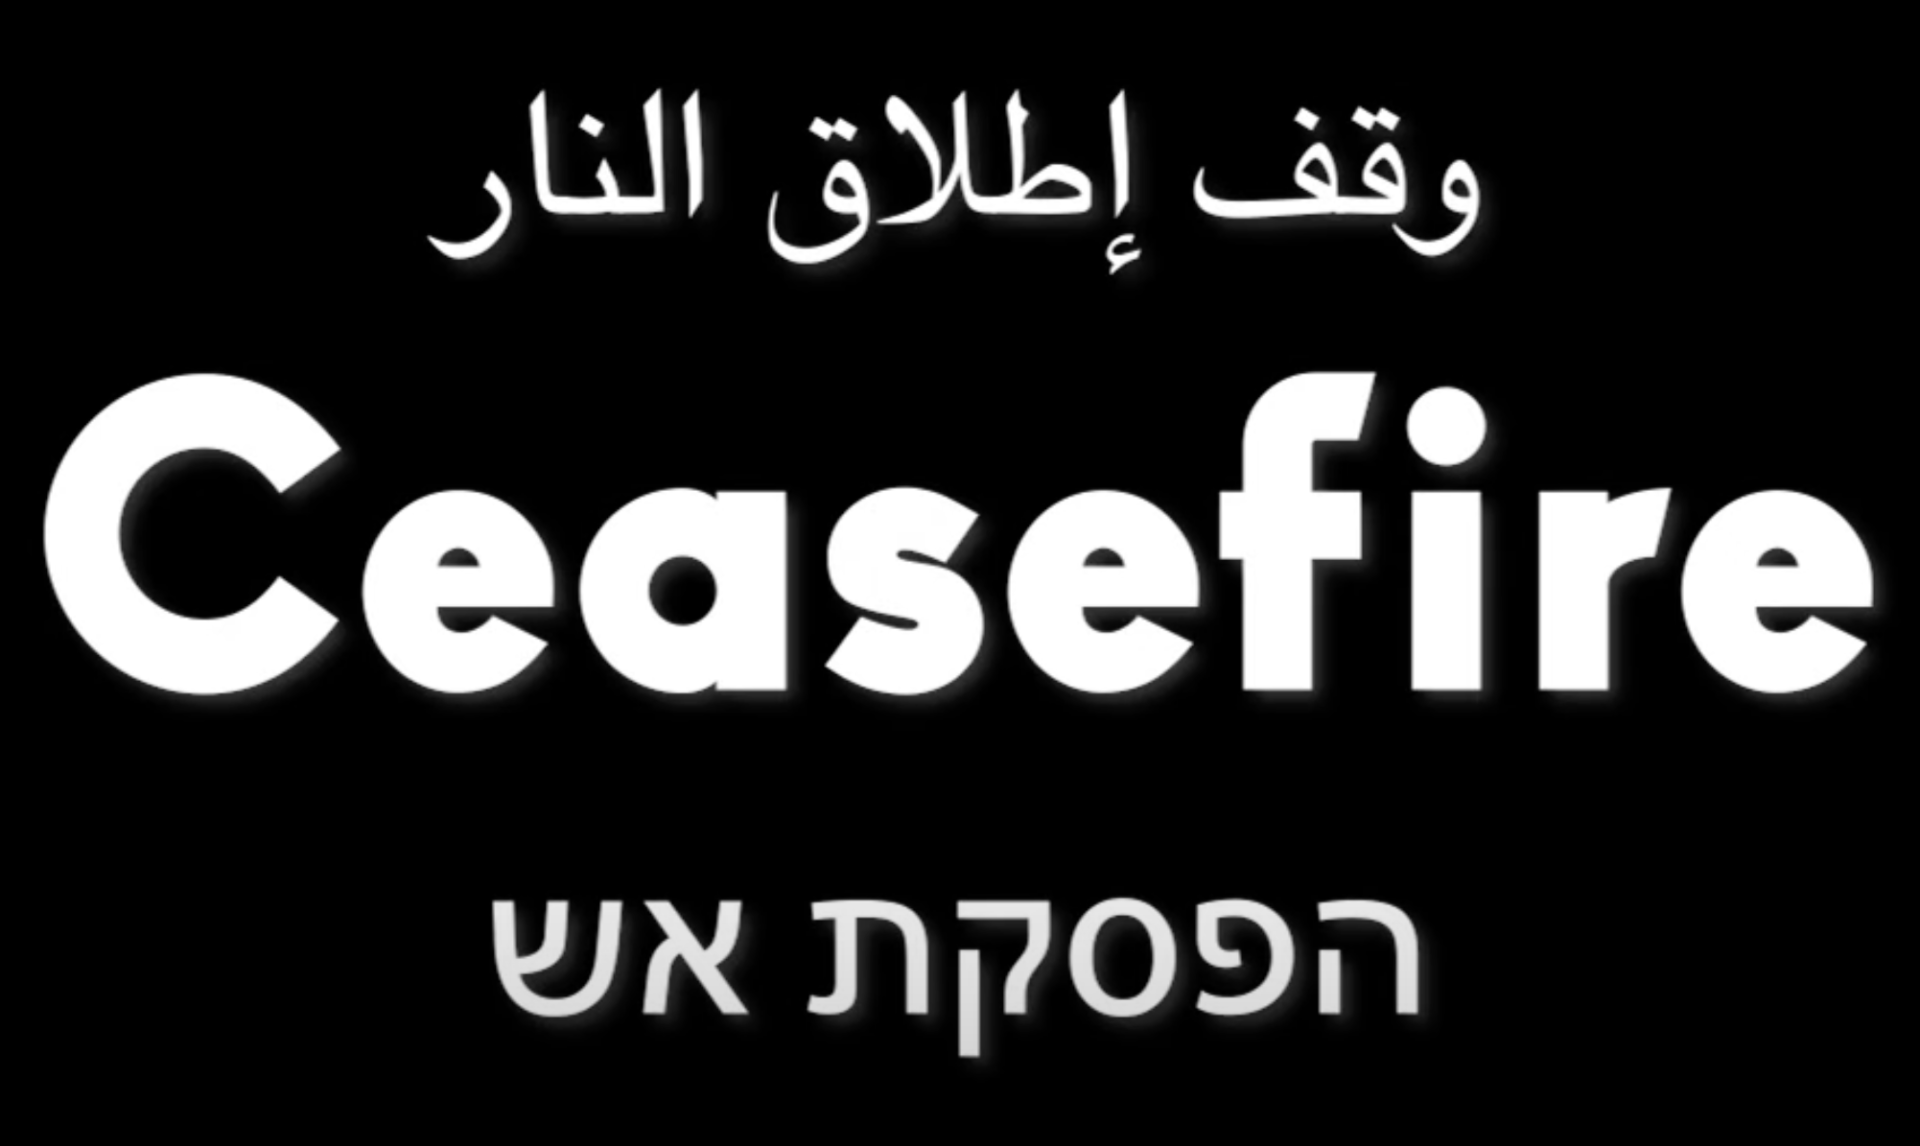 Ceasefire Video Text